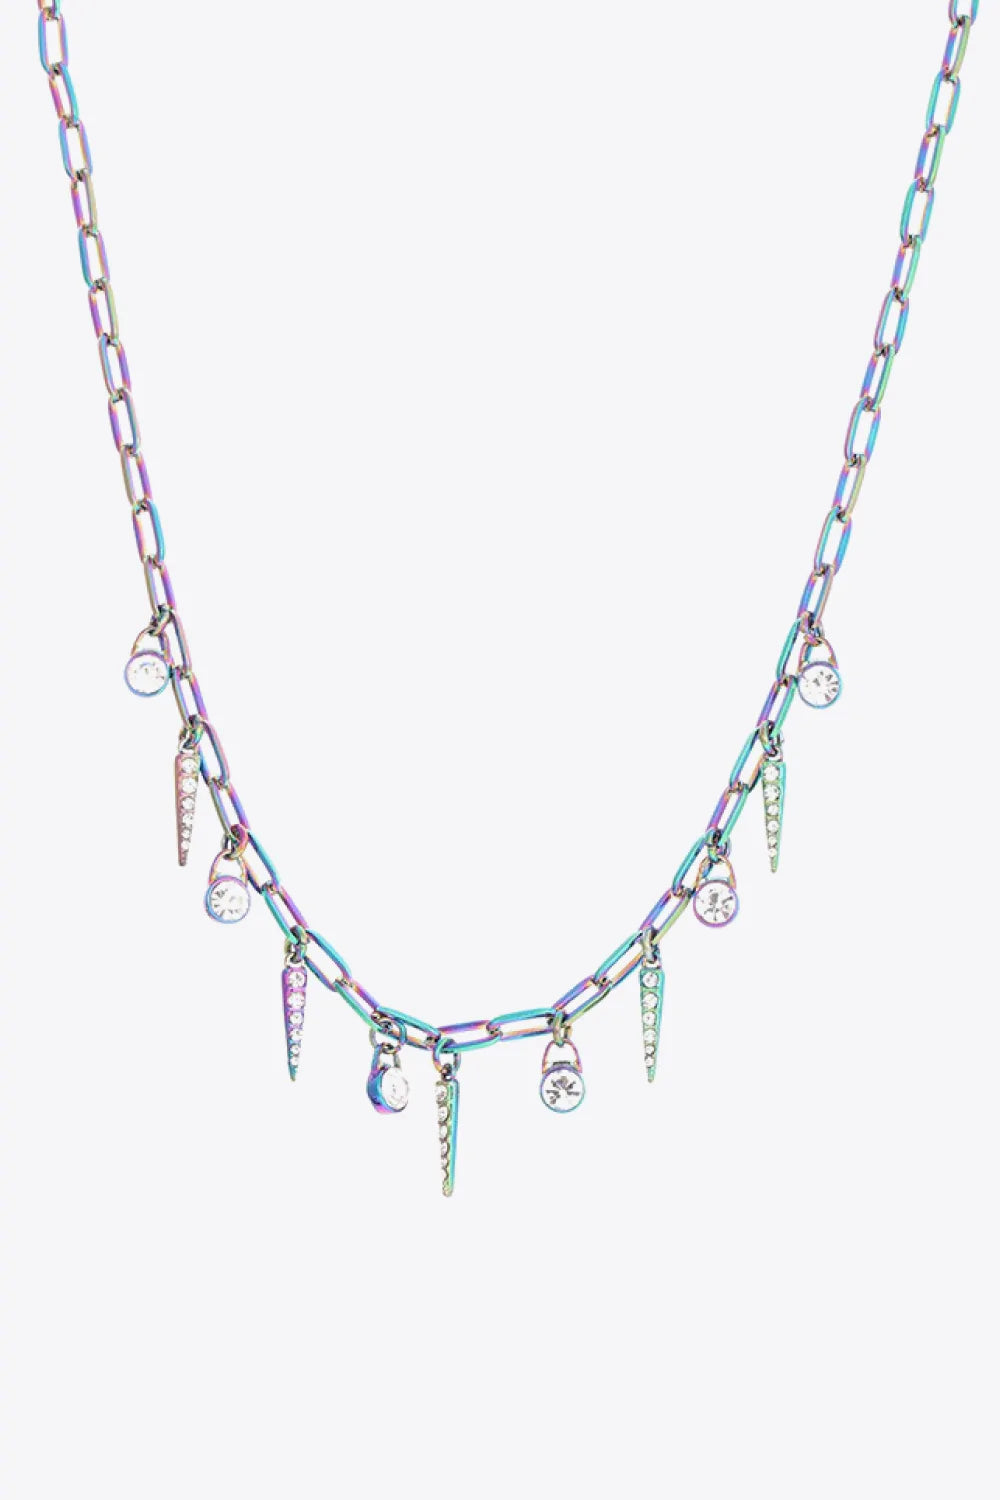 Colorful Multi-Charm Necklace - Necklaces - FITGGINS